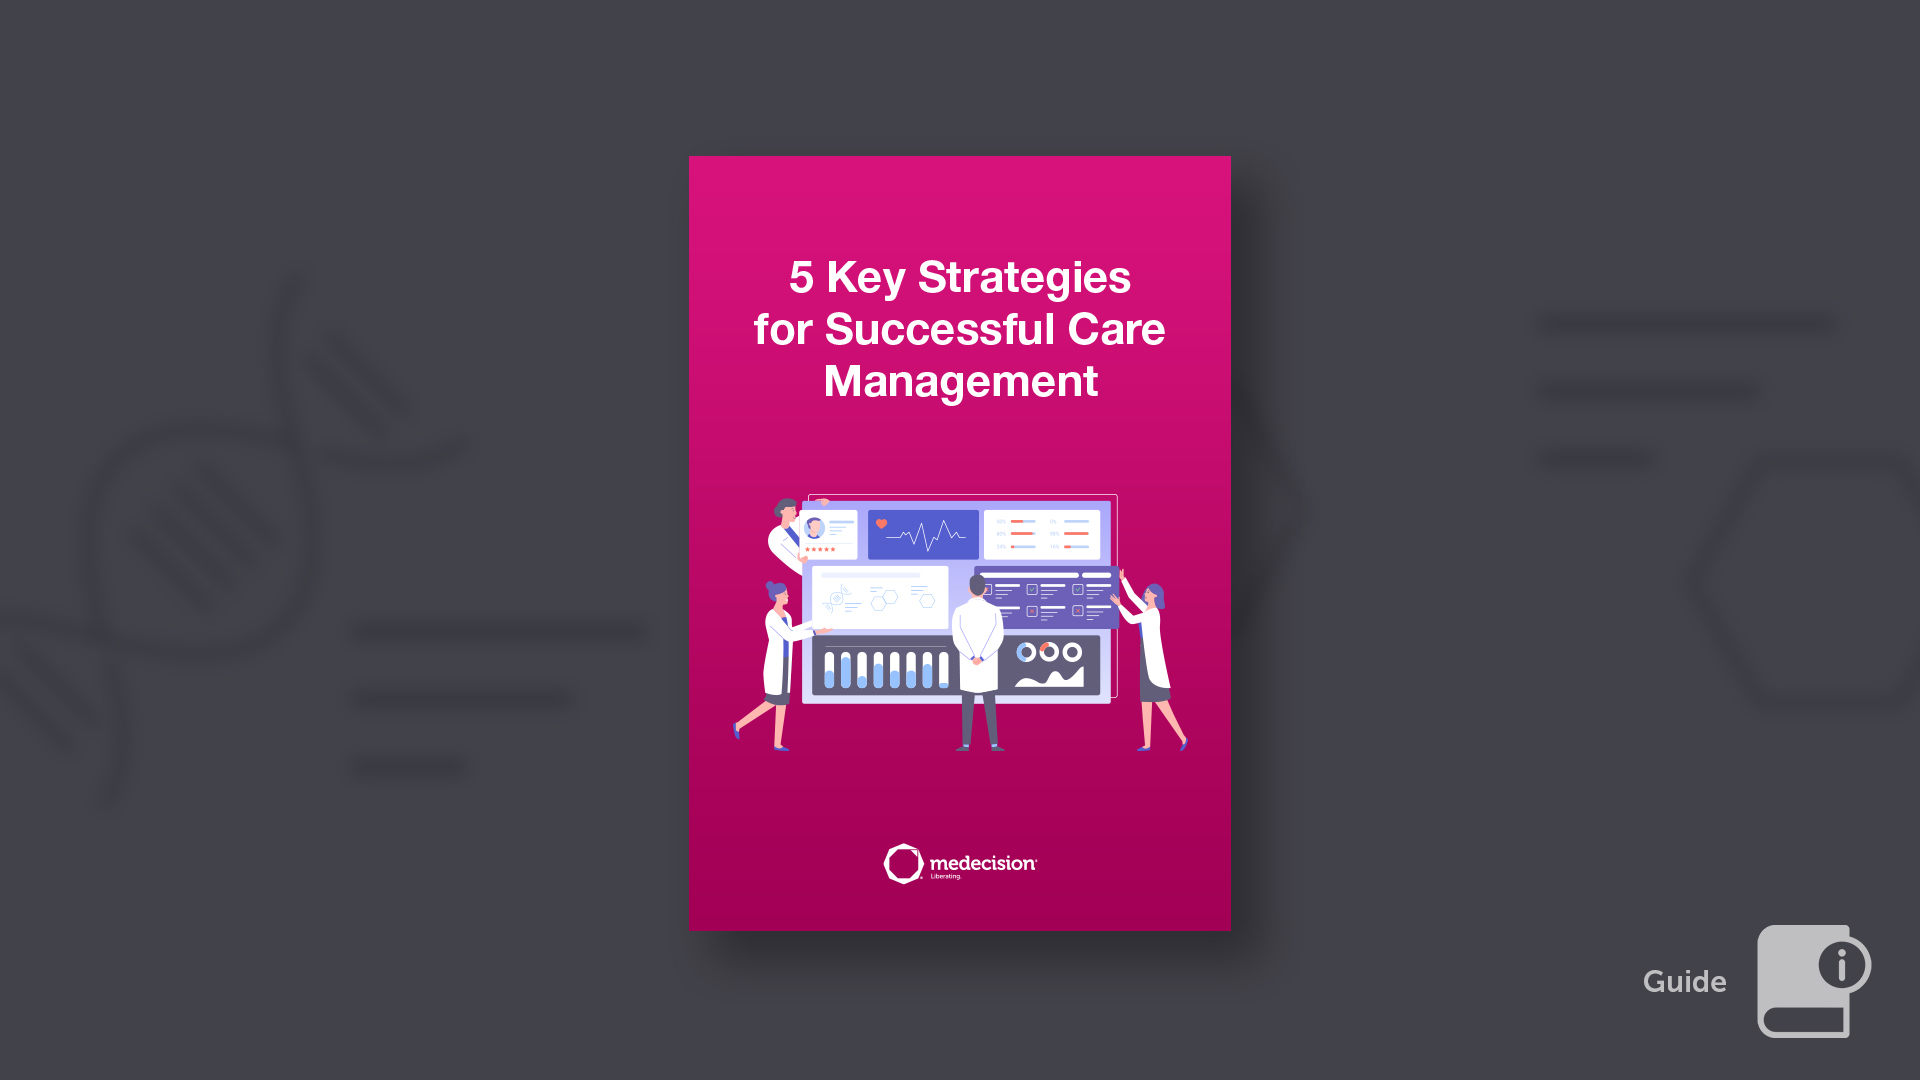 5 Key Strategies for Successful Care Management